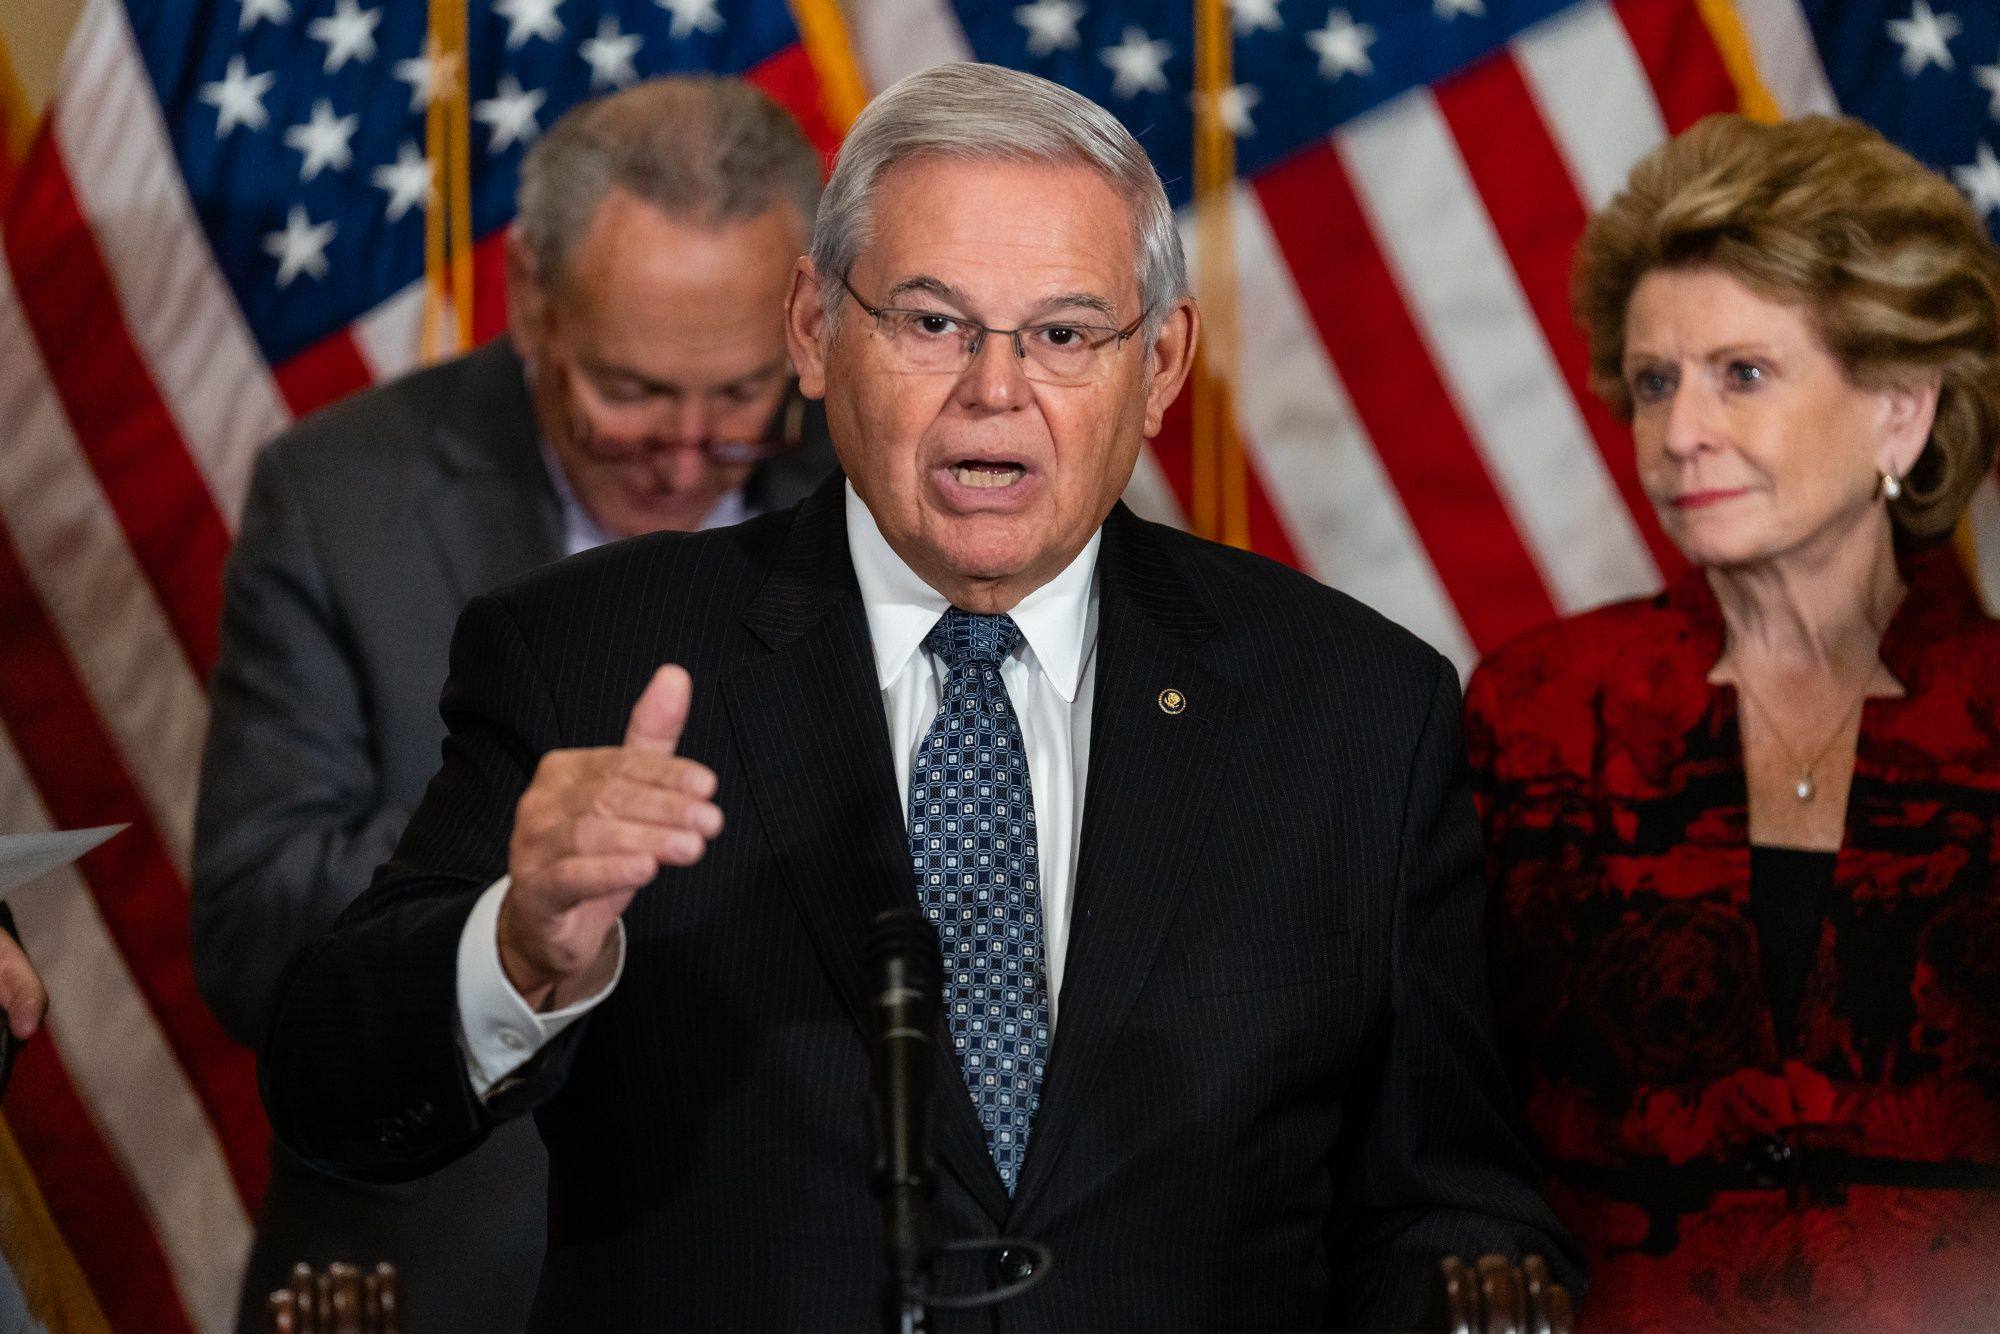 Senator Bob Menendez, a Democrat from New Jersey, speaks during a news conference in 2022. Photo: Bloomberg